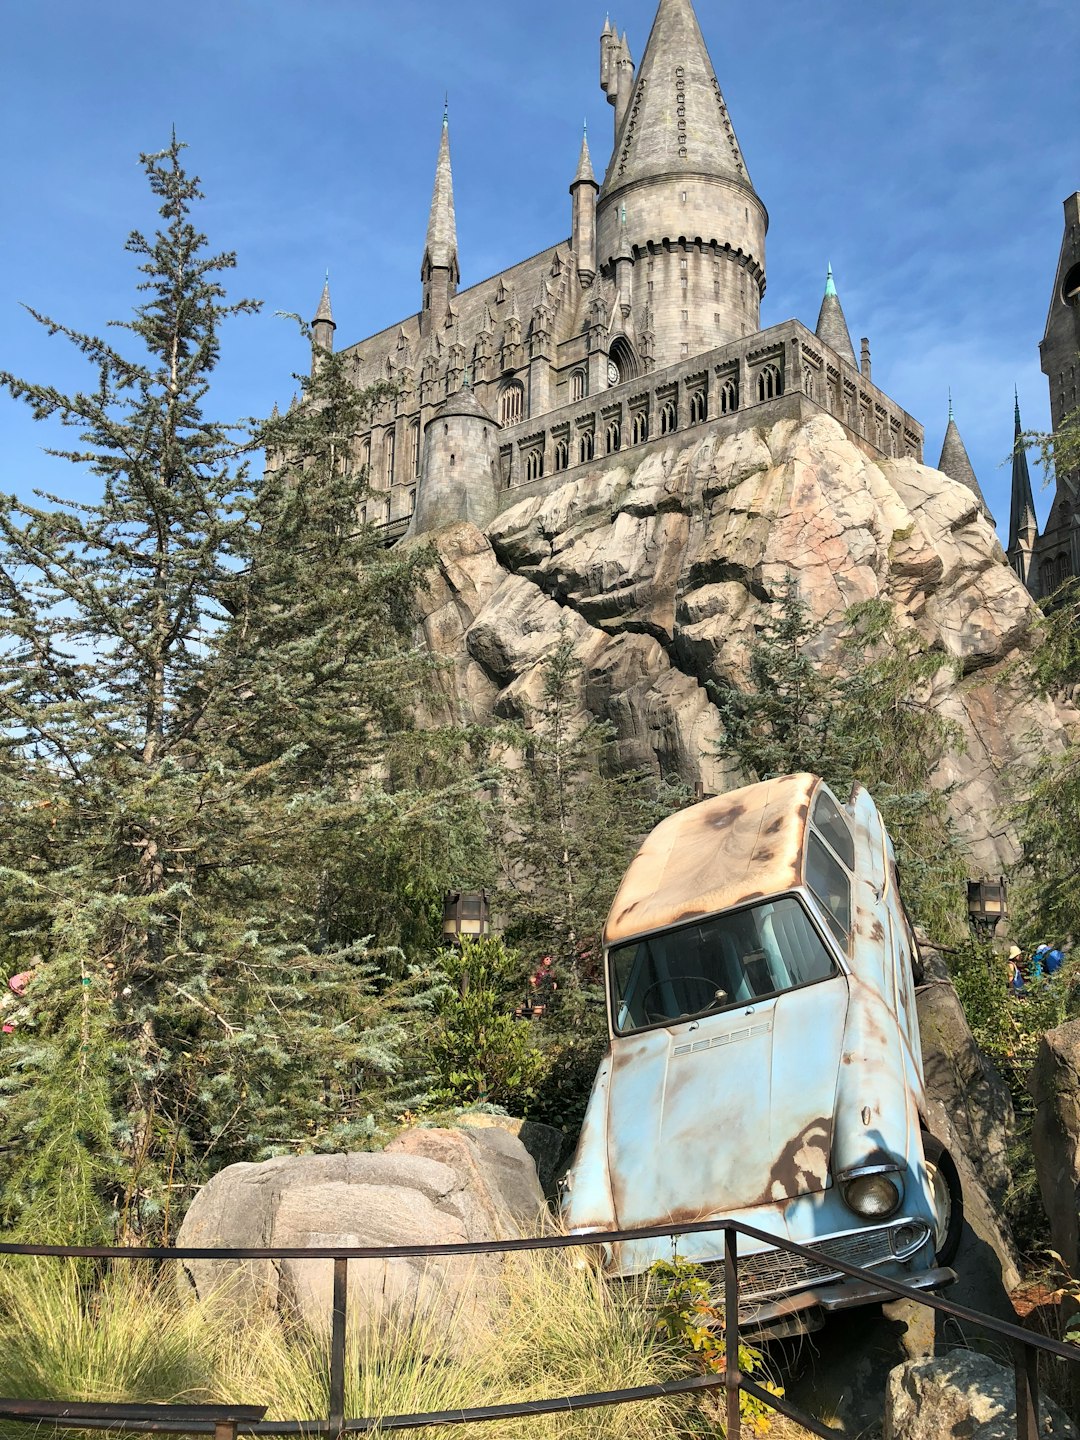 Historic site photo spot The Wizarding World of Harry Potter Los Angeles